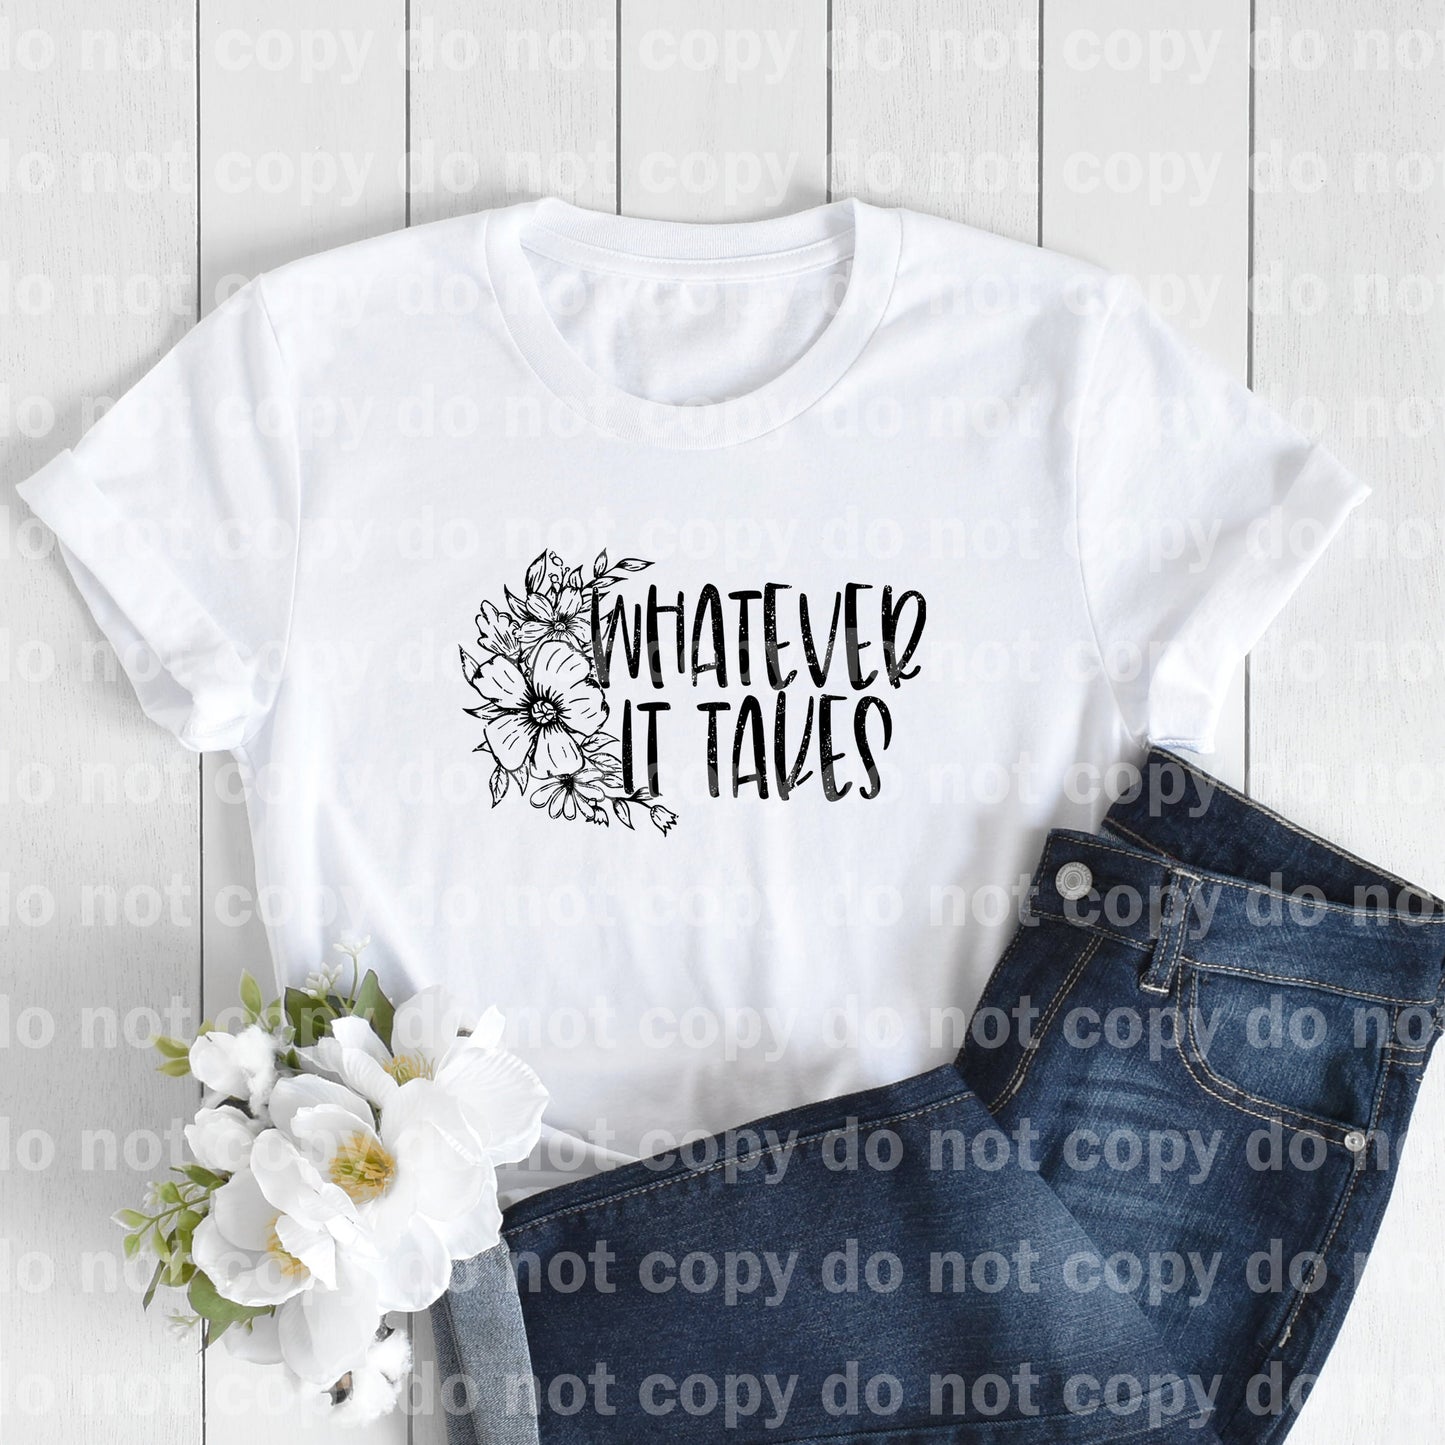 Whatever It Takes Distressed Full Color/One Color Dream Print or Sublimation Print